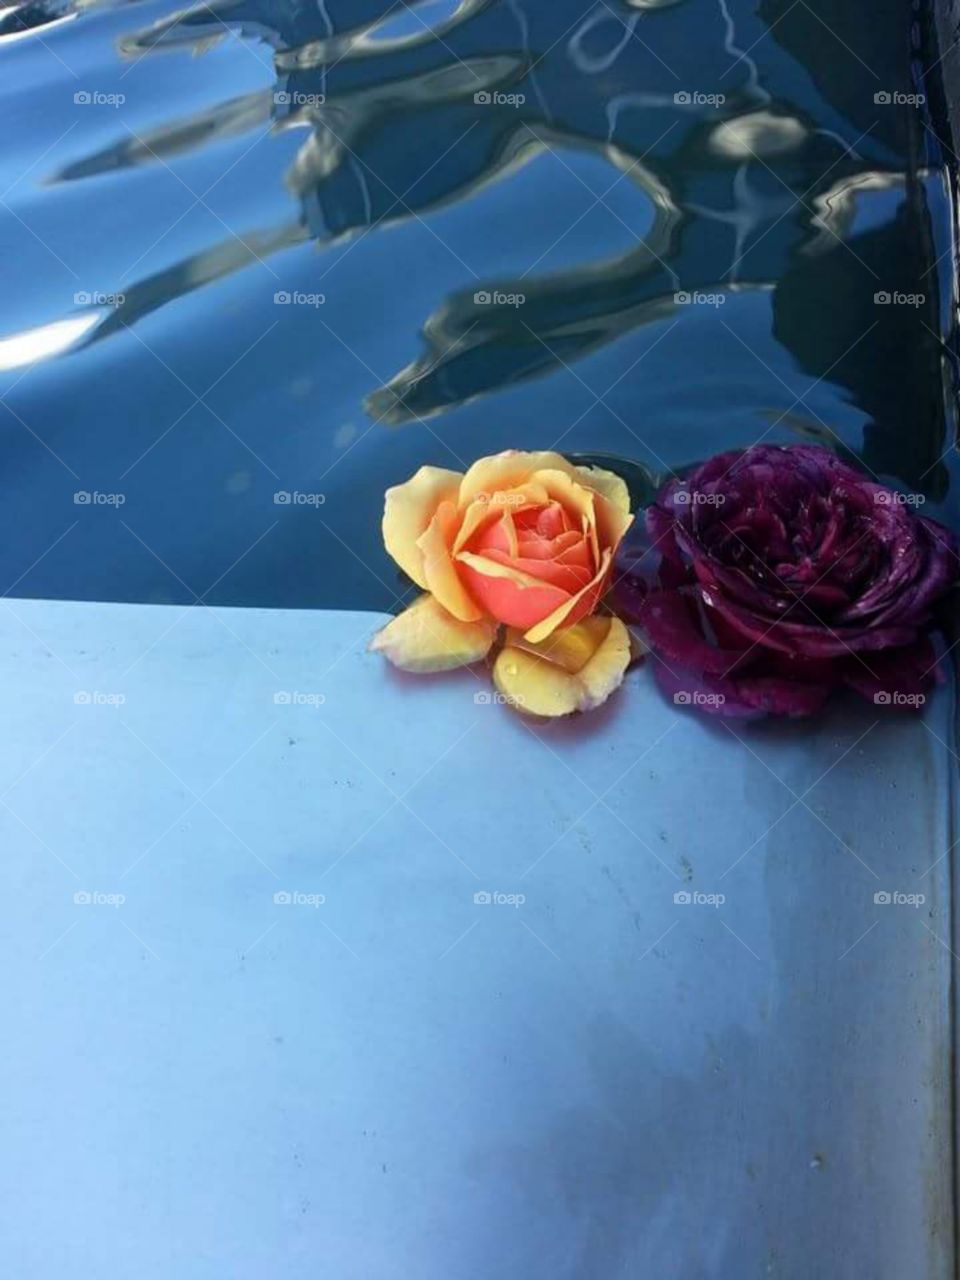 Rose's in a fountain